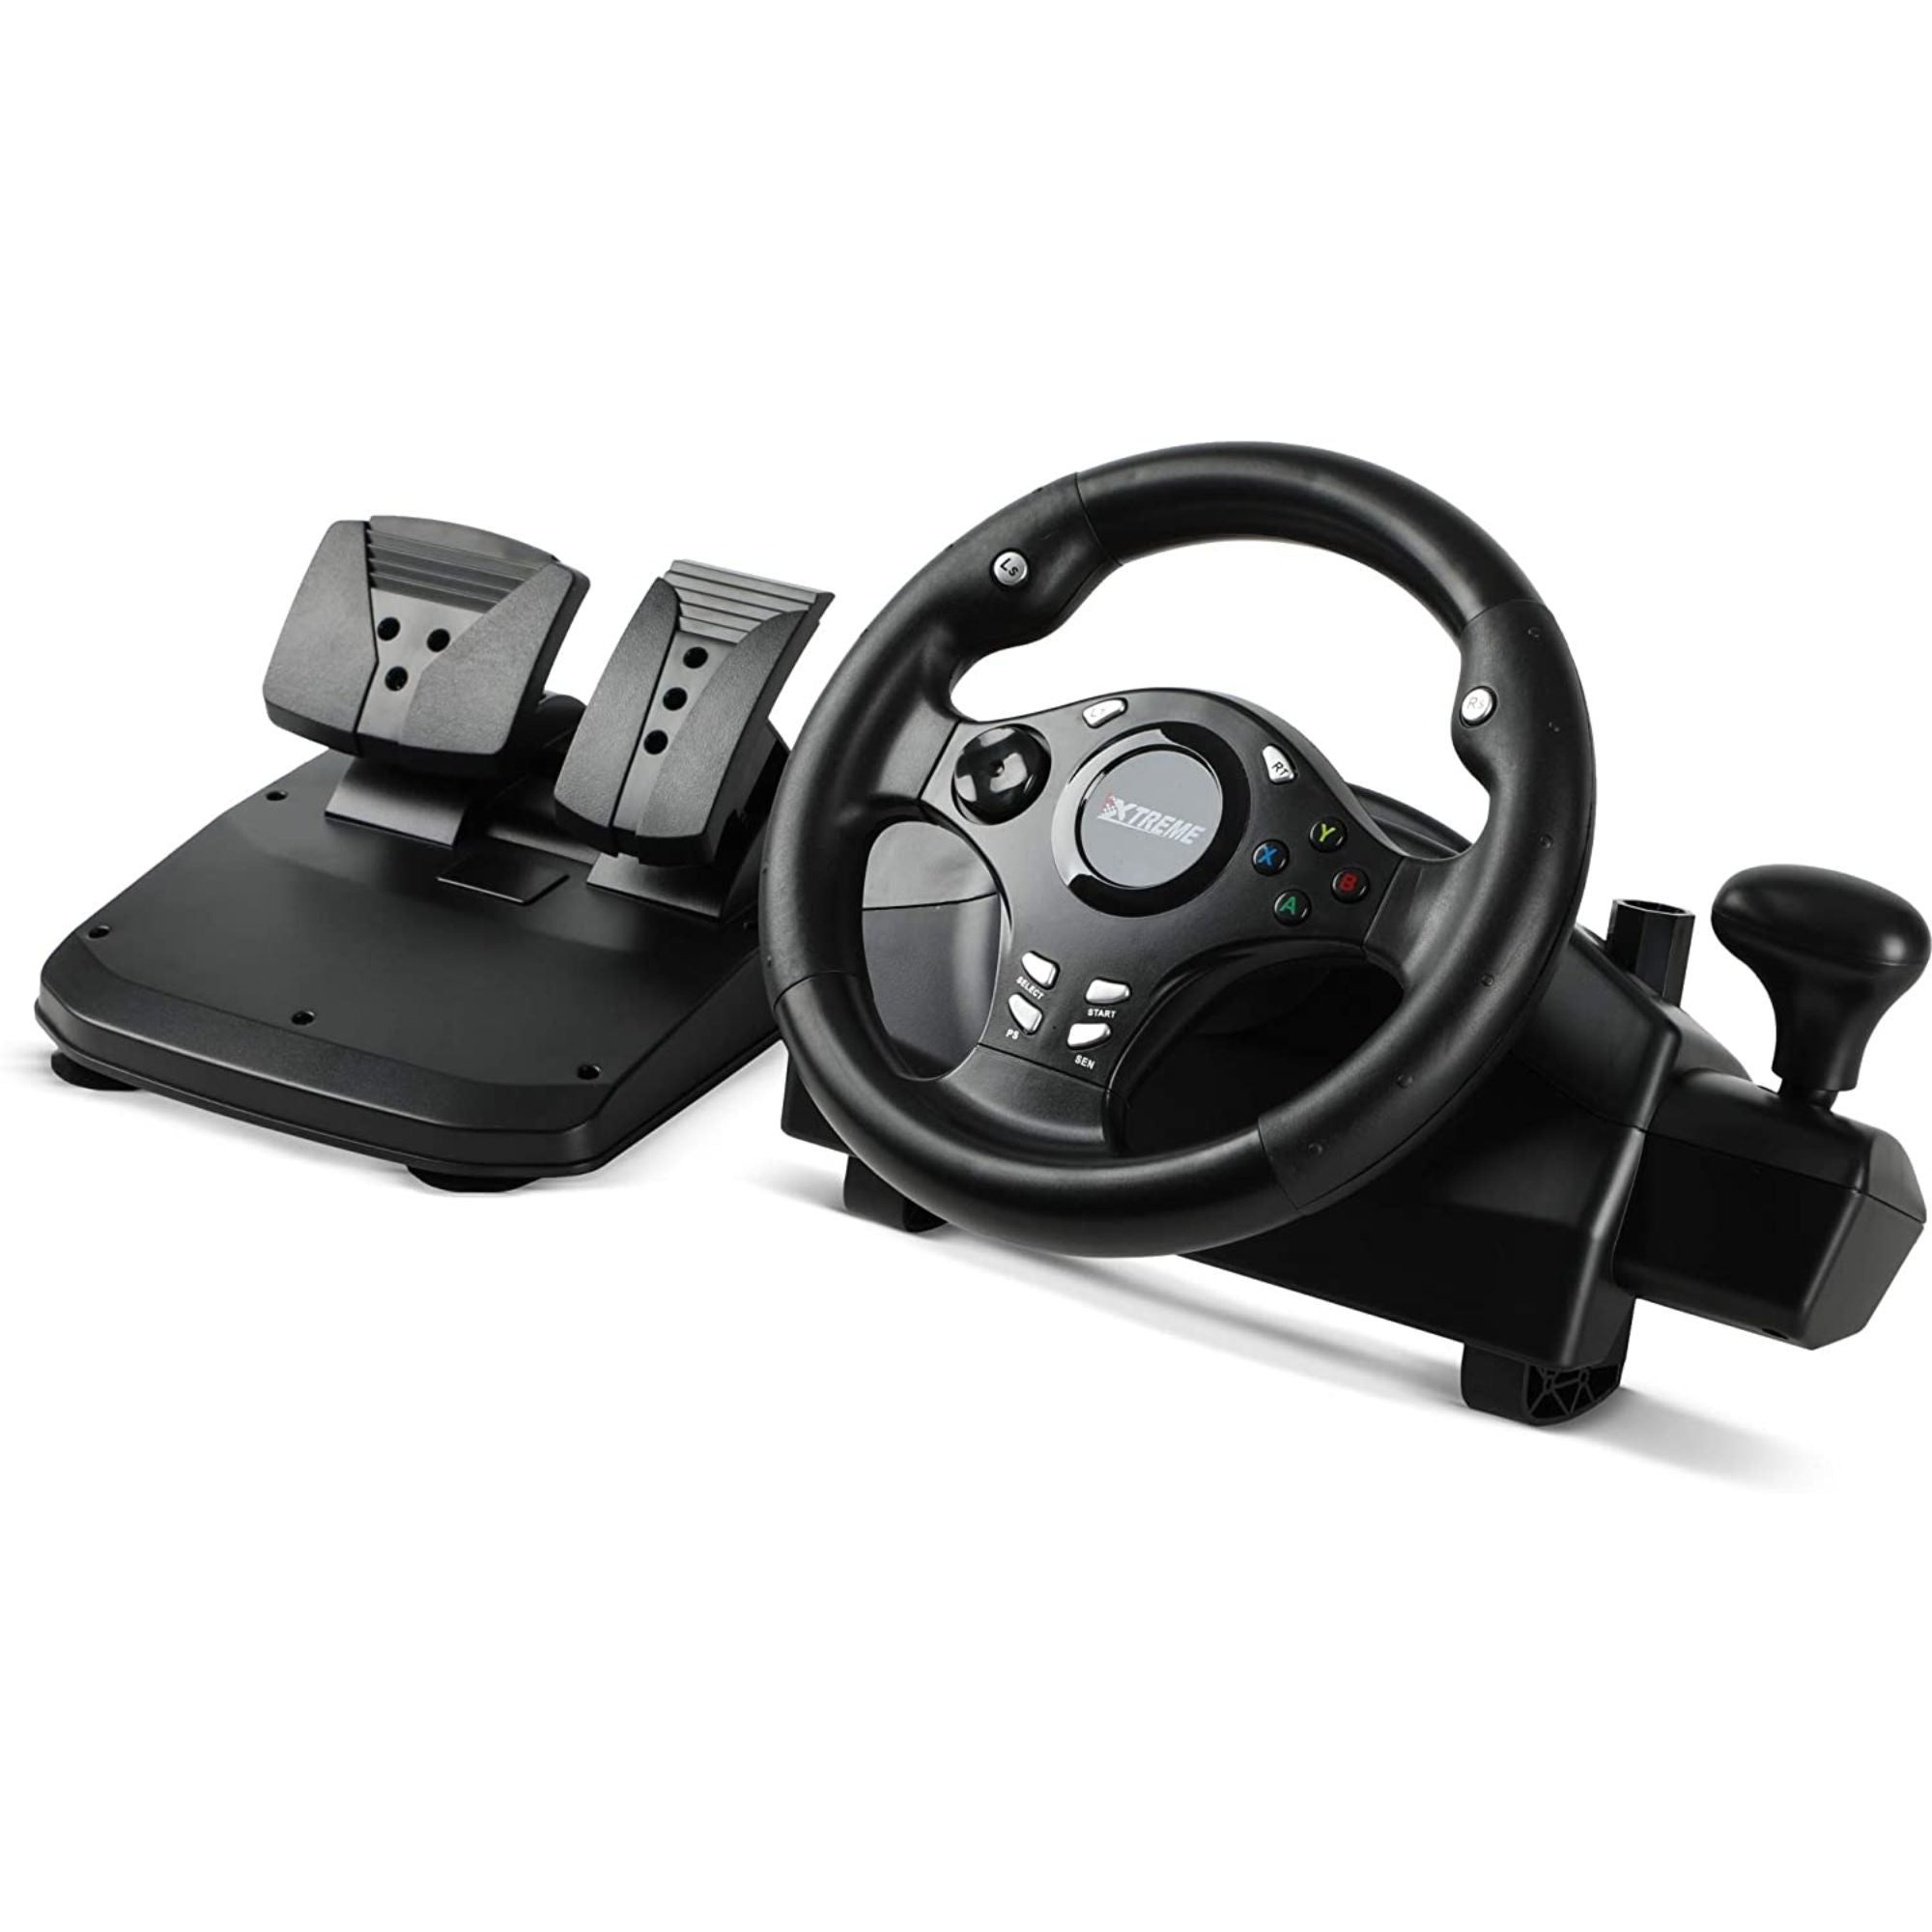 XTREME Racing Gaming Steering Wheel for PS4, Xbox One, Xbox 360